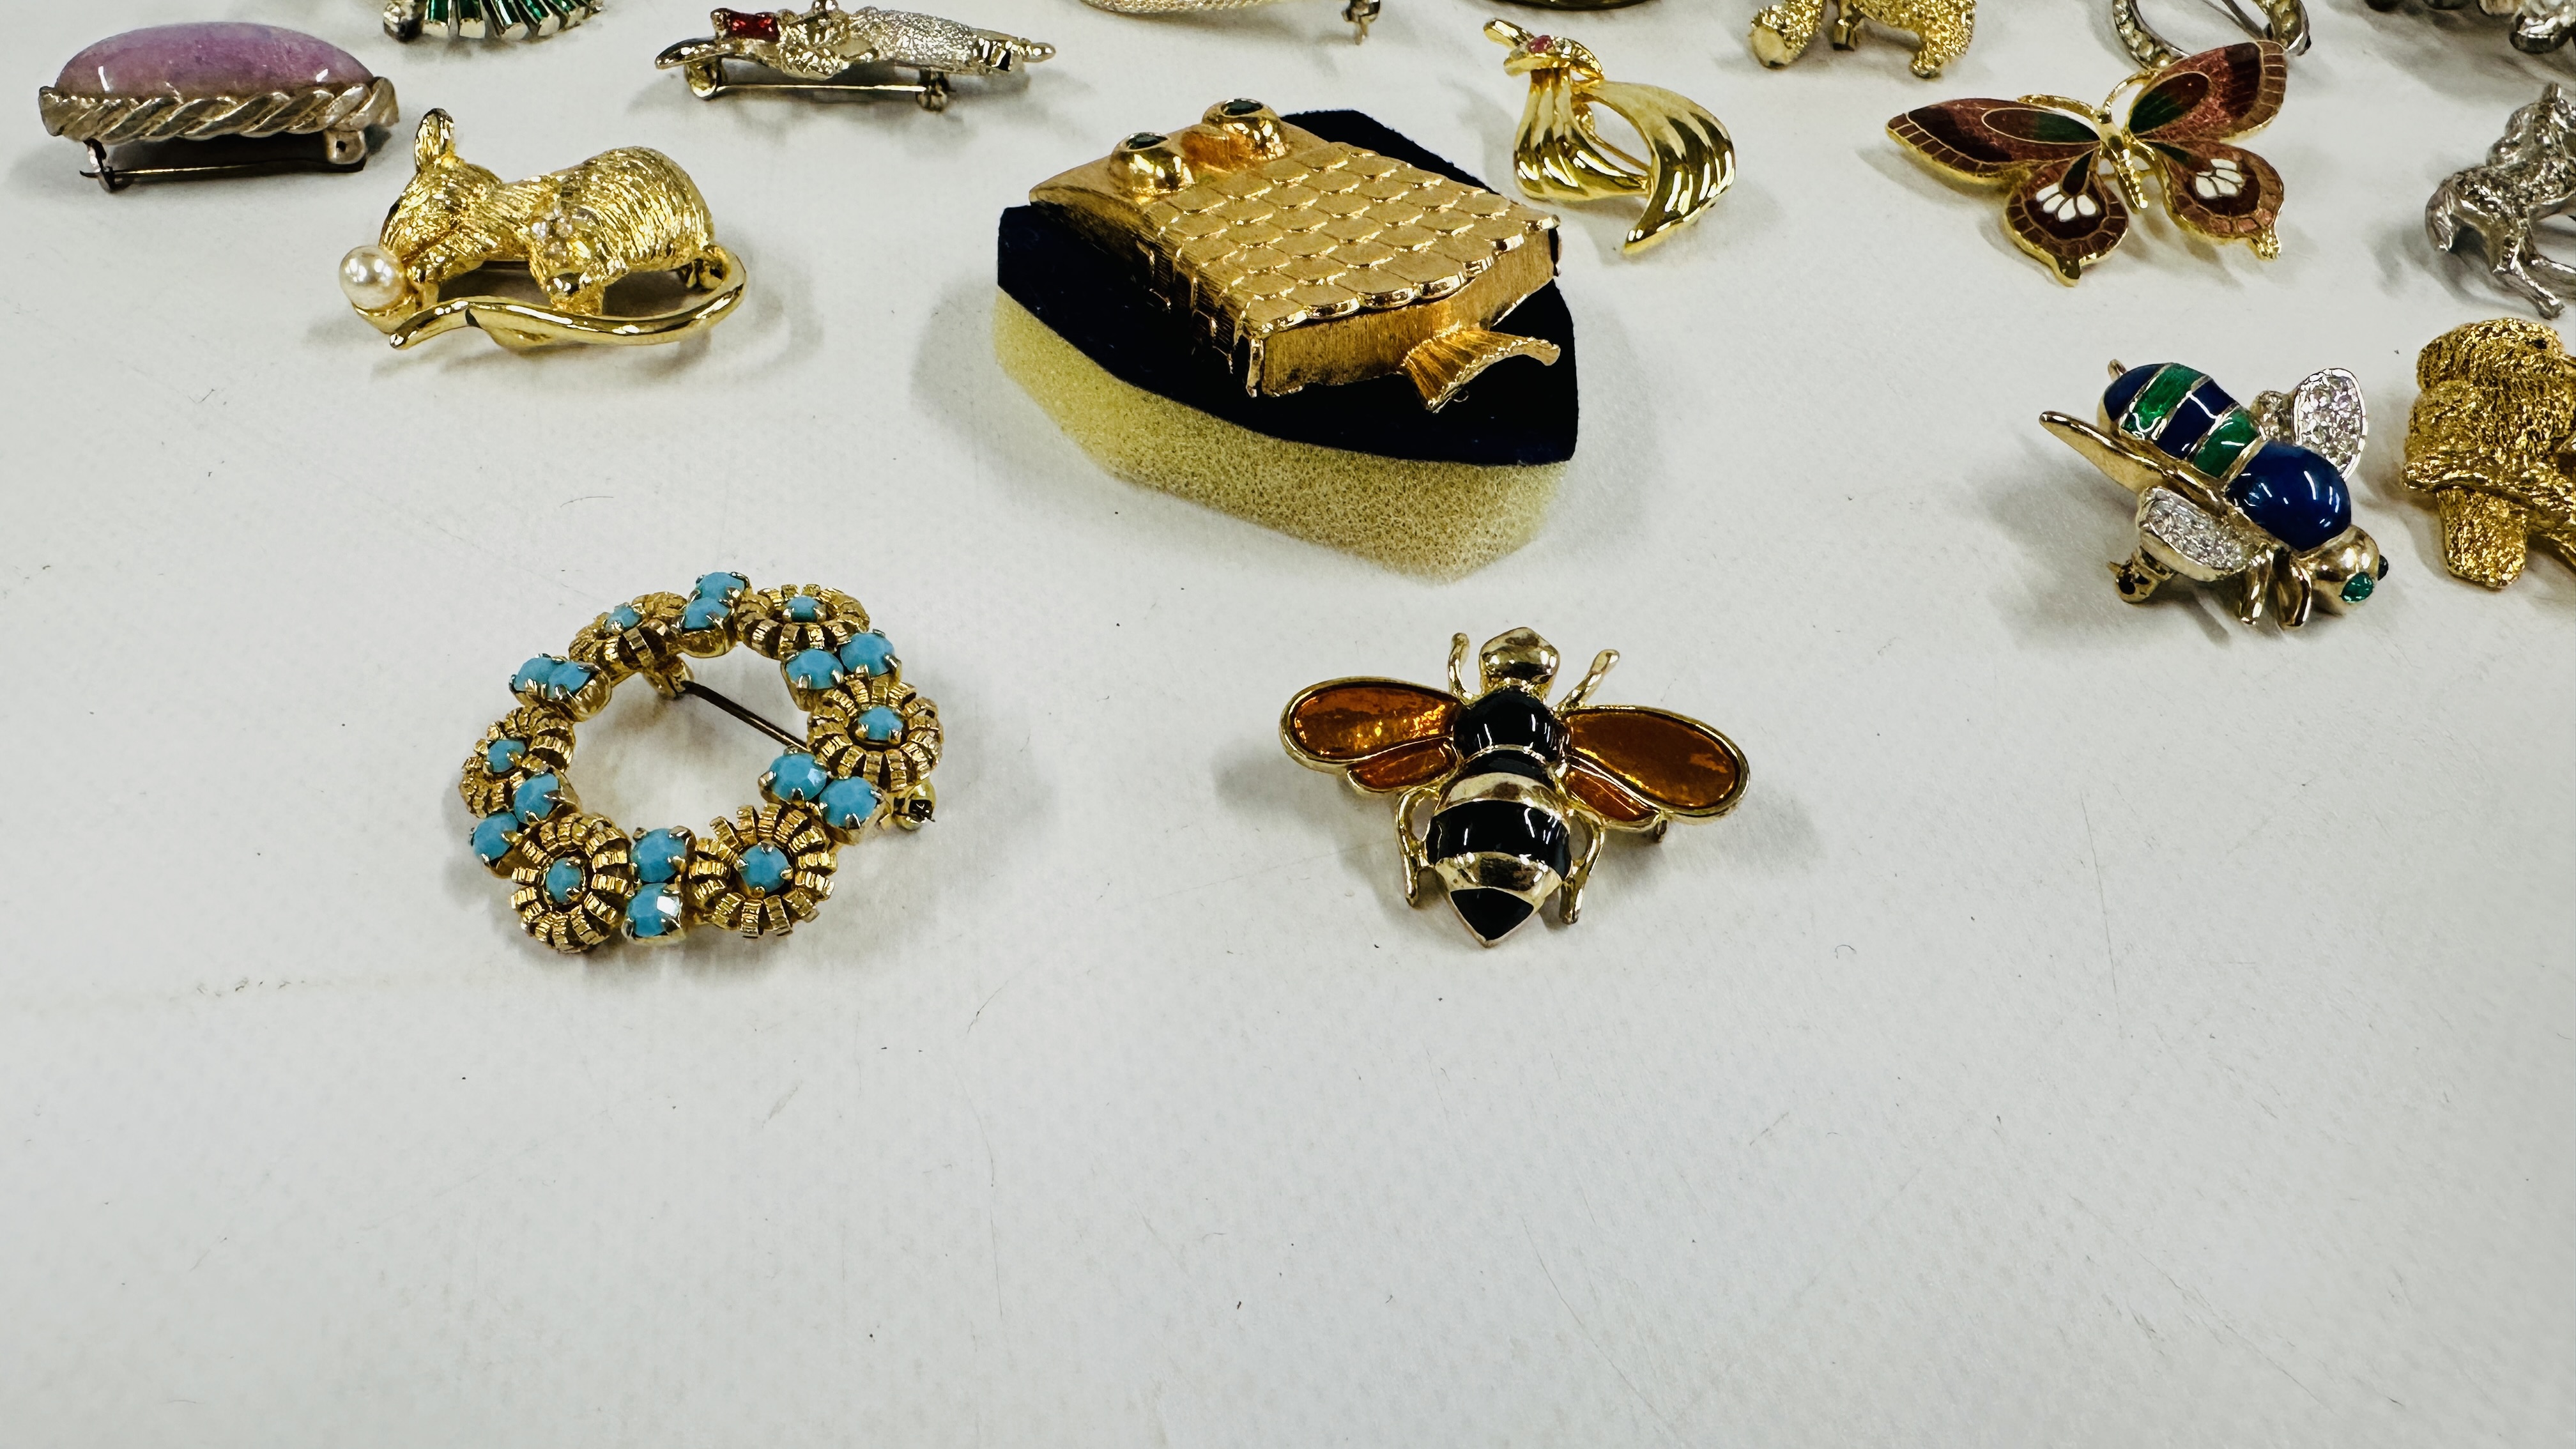 33 VINTAGE BROOCHES, BEES, TEDDY BEAR, ANIMALS ETC. - Image 2 of 9